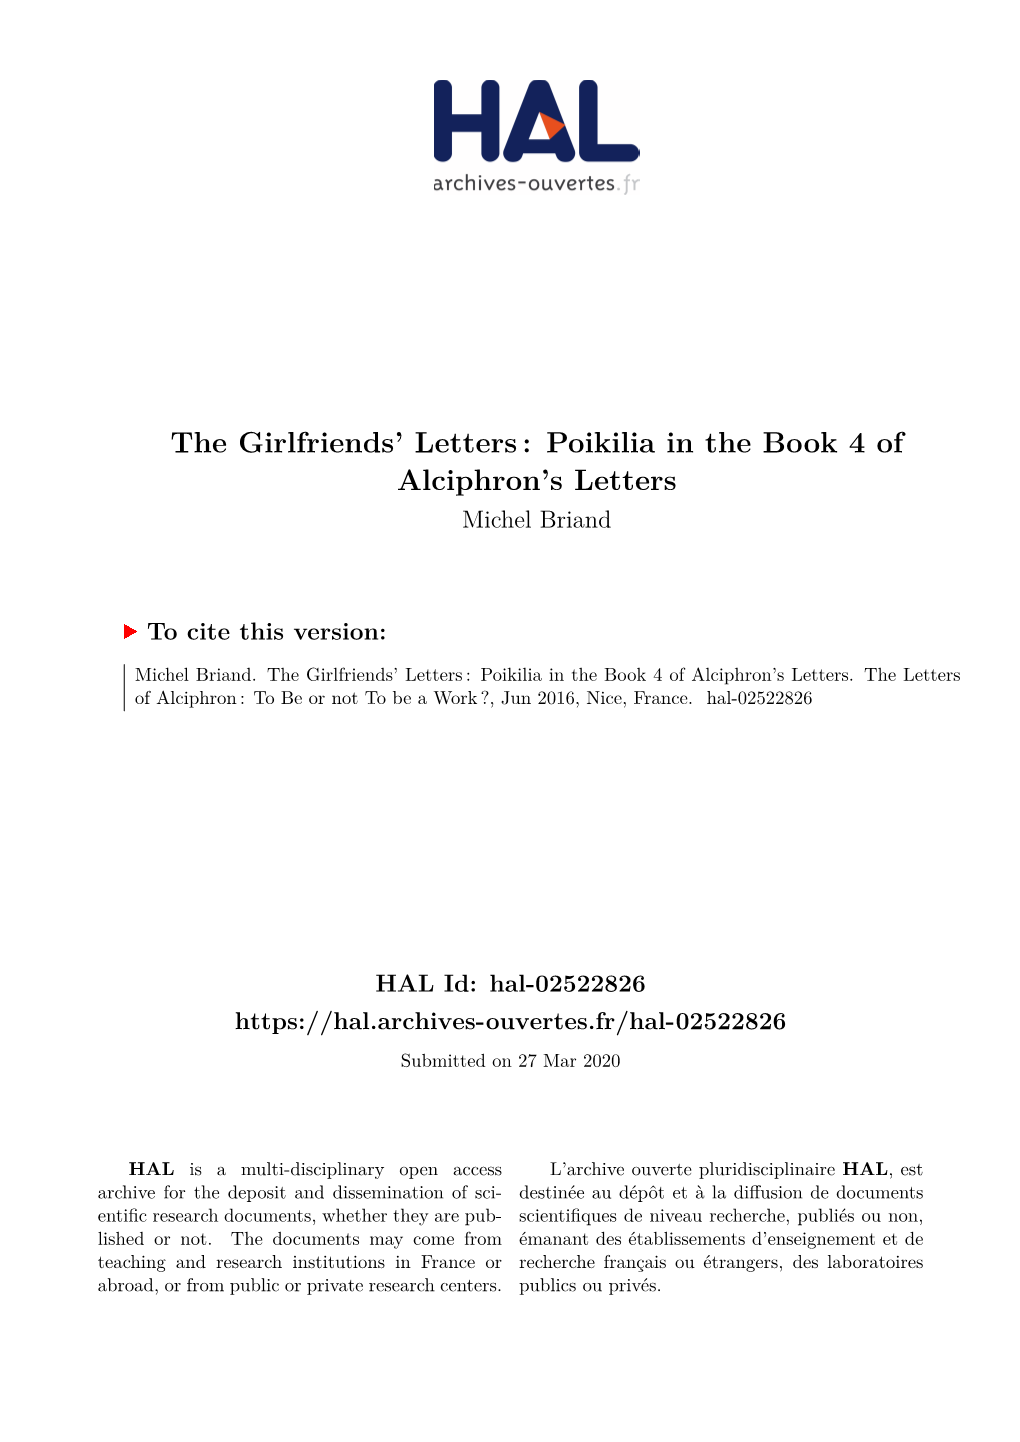 Poikilia in the Book 4 of Alciphron's Letters